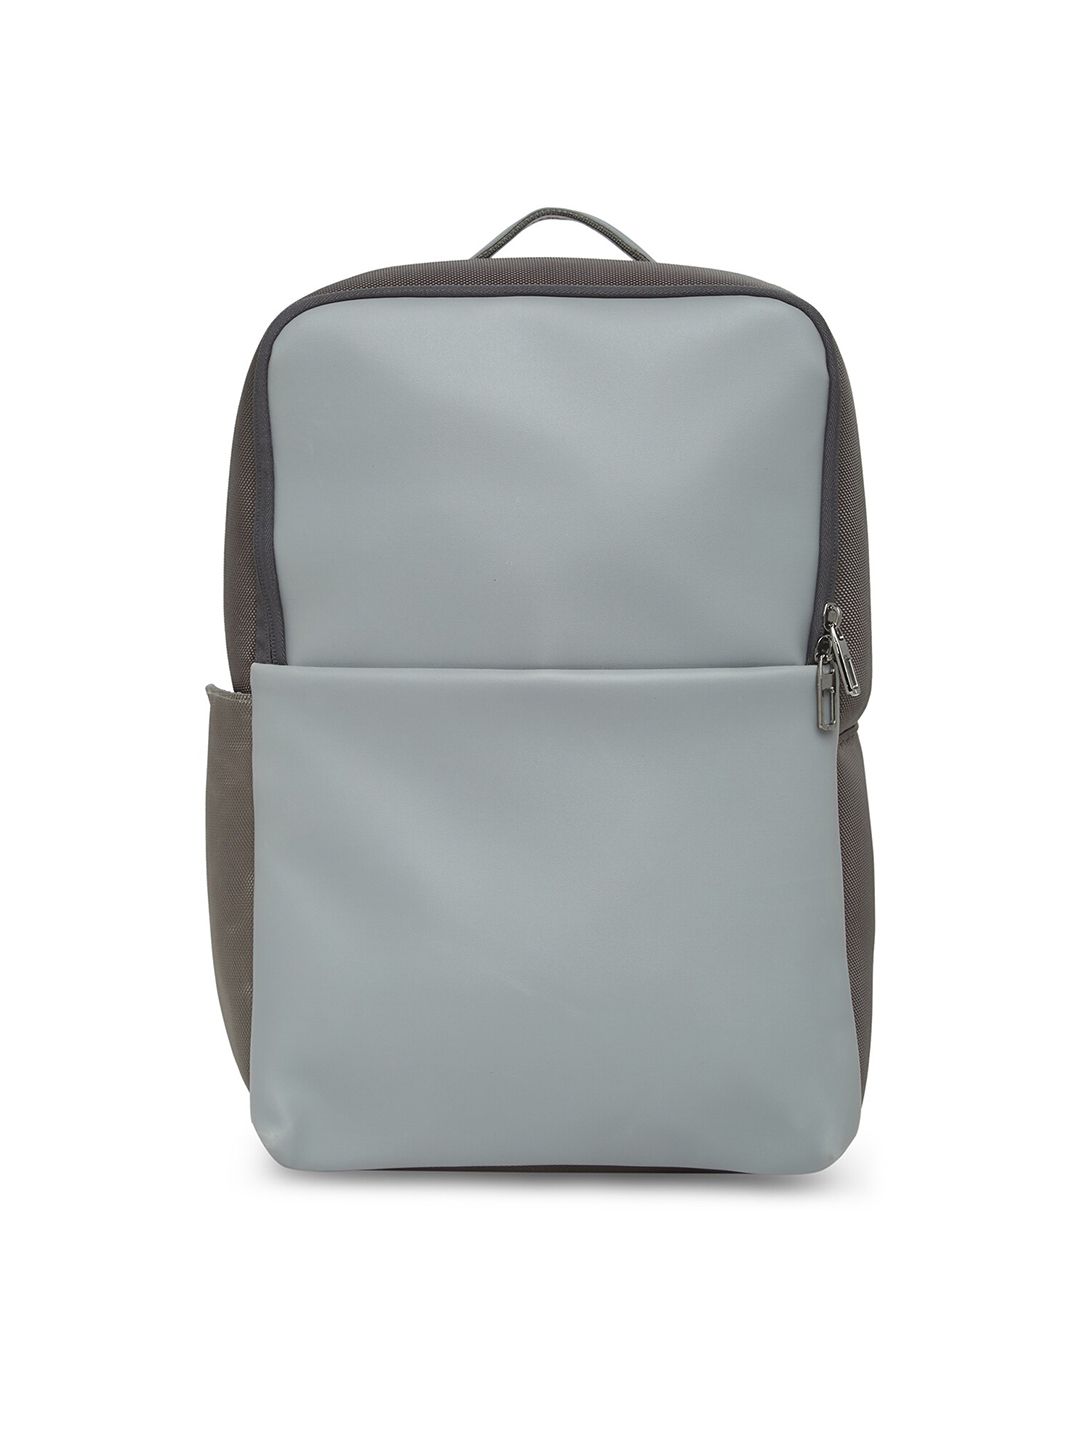 MBOSS Unisex Grey Solid Backpack Price in India